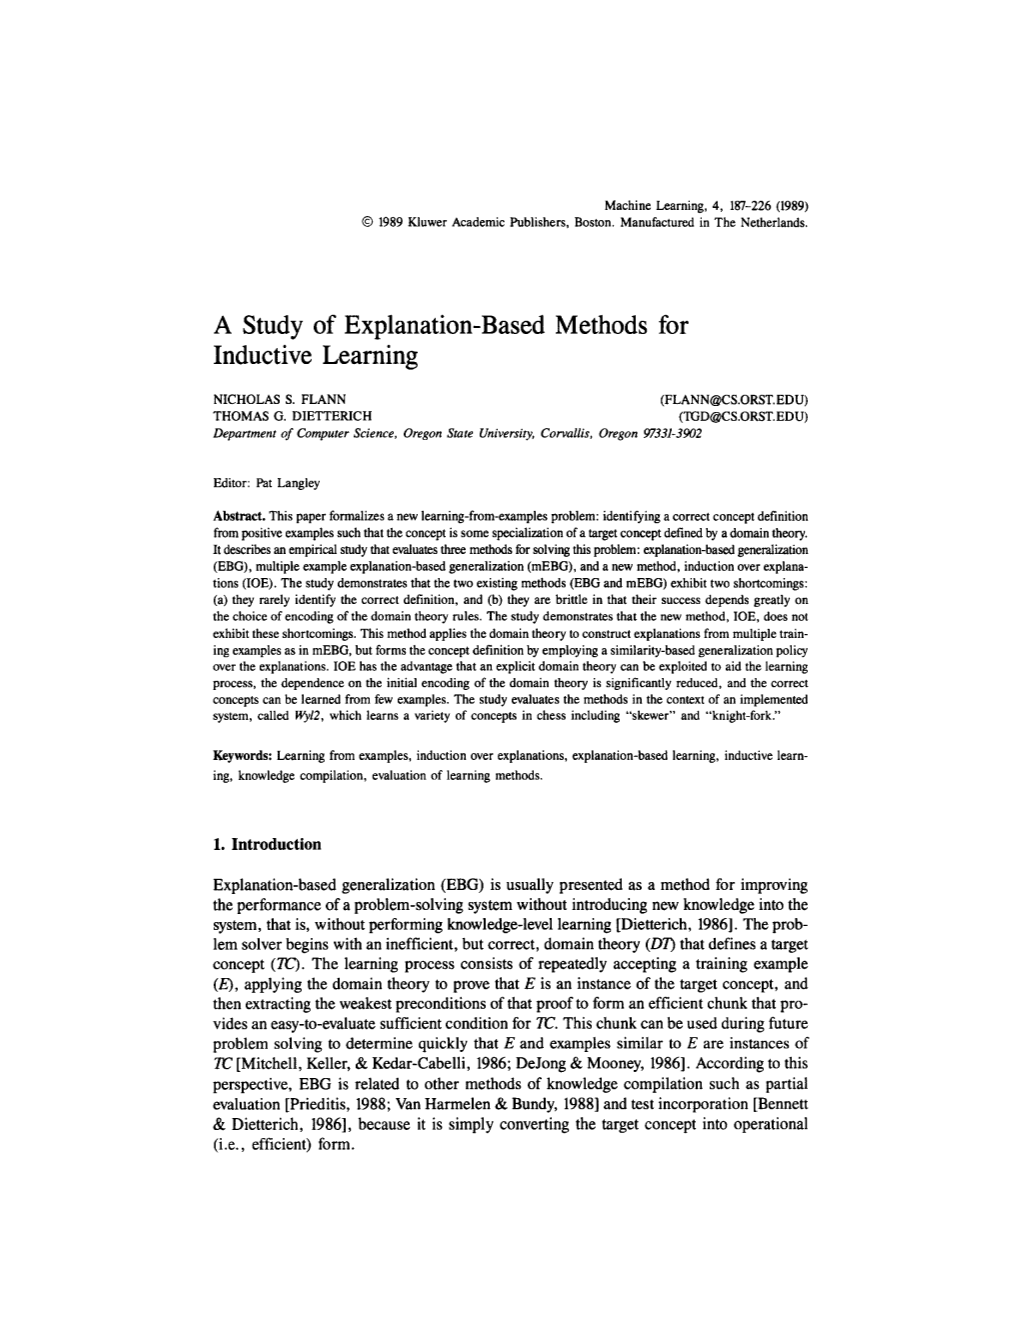 A Study of Explanation-Based Methods for Inductive Learning